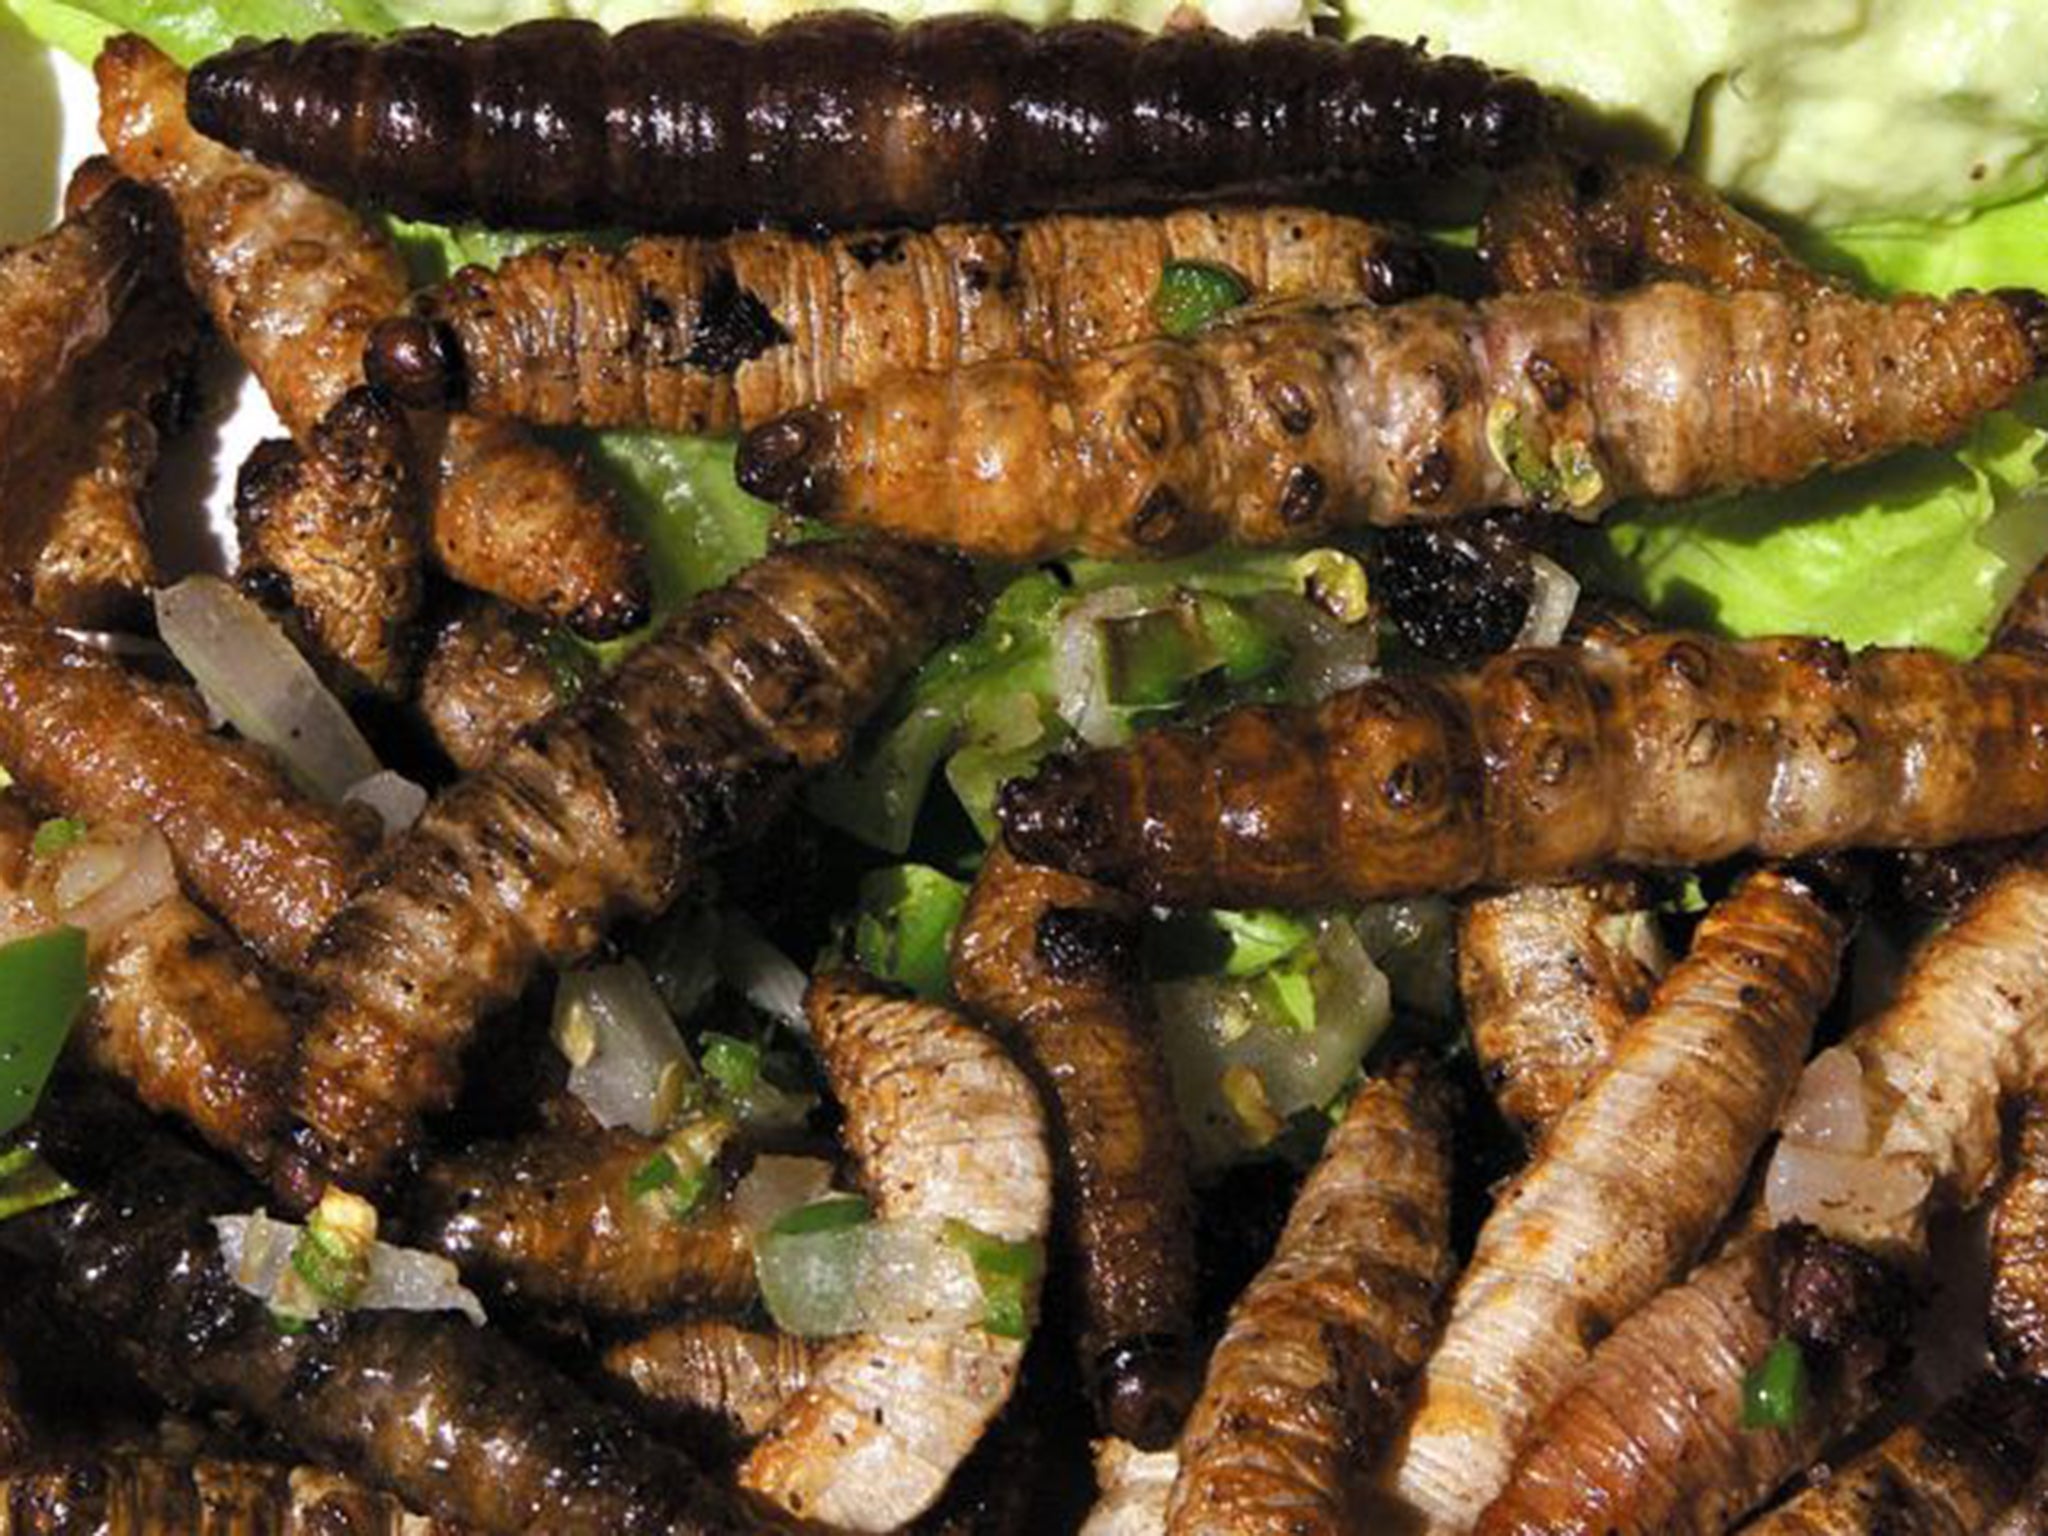 Sauteed maggots are a typical Mexican delicacy (AFP/Get)